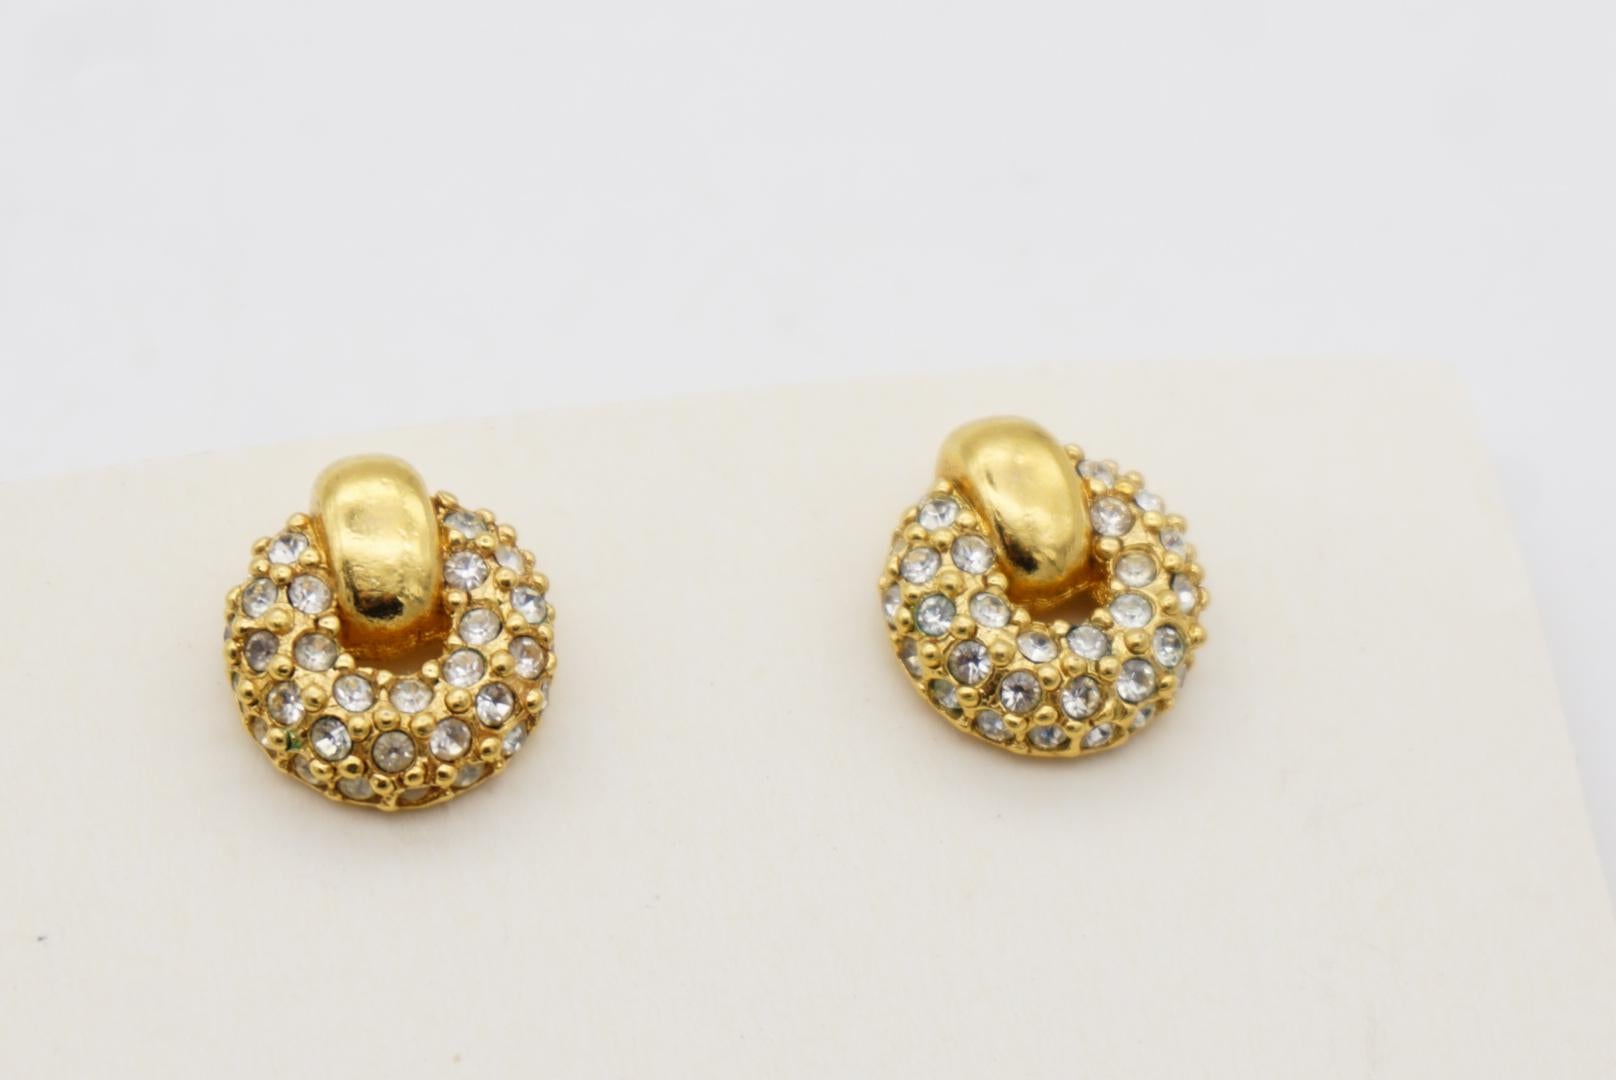 Christian Dior GROSSE 1960s Whole Crystals Circle Knot Openwork Gold Earrings 5